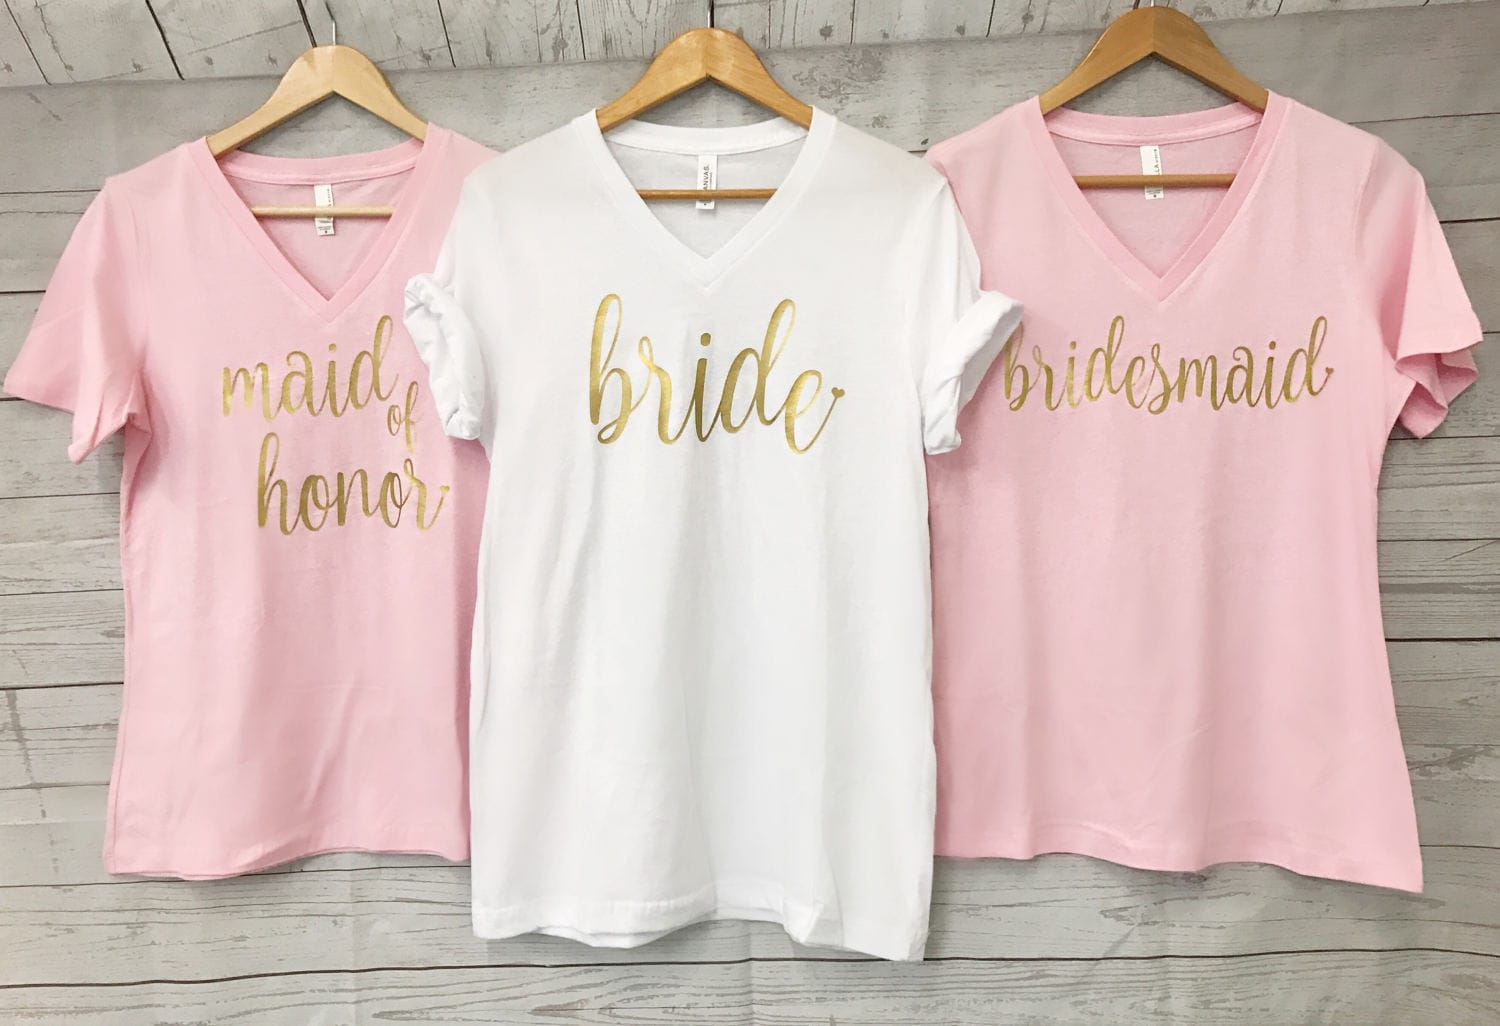 Bridal Party Shirts in Light Pink and Gold Relaxed VNecks for Bridesmaids Maid of Honor and Bride